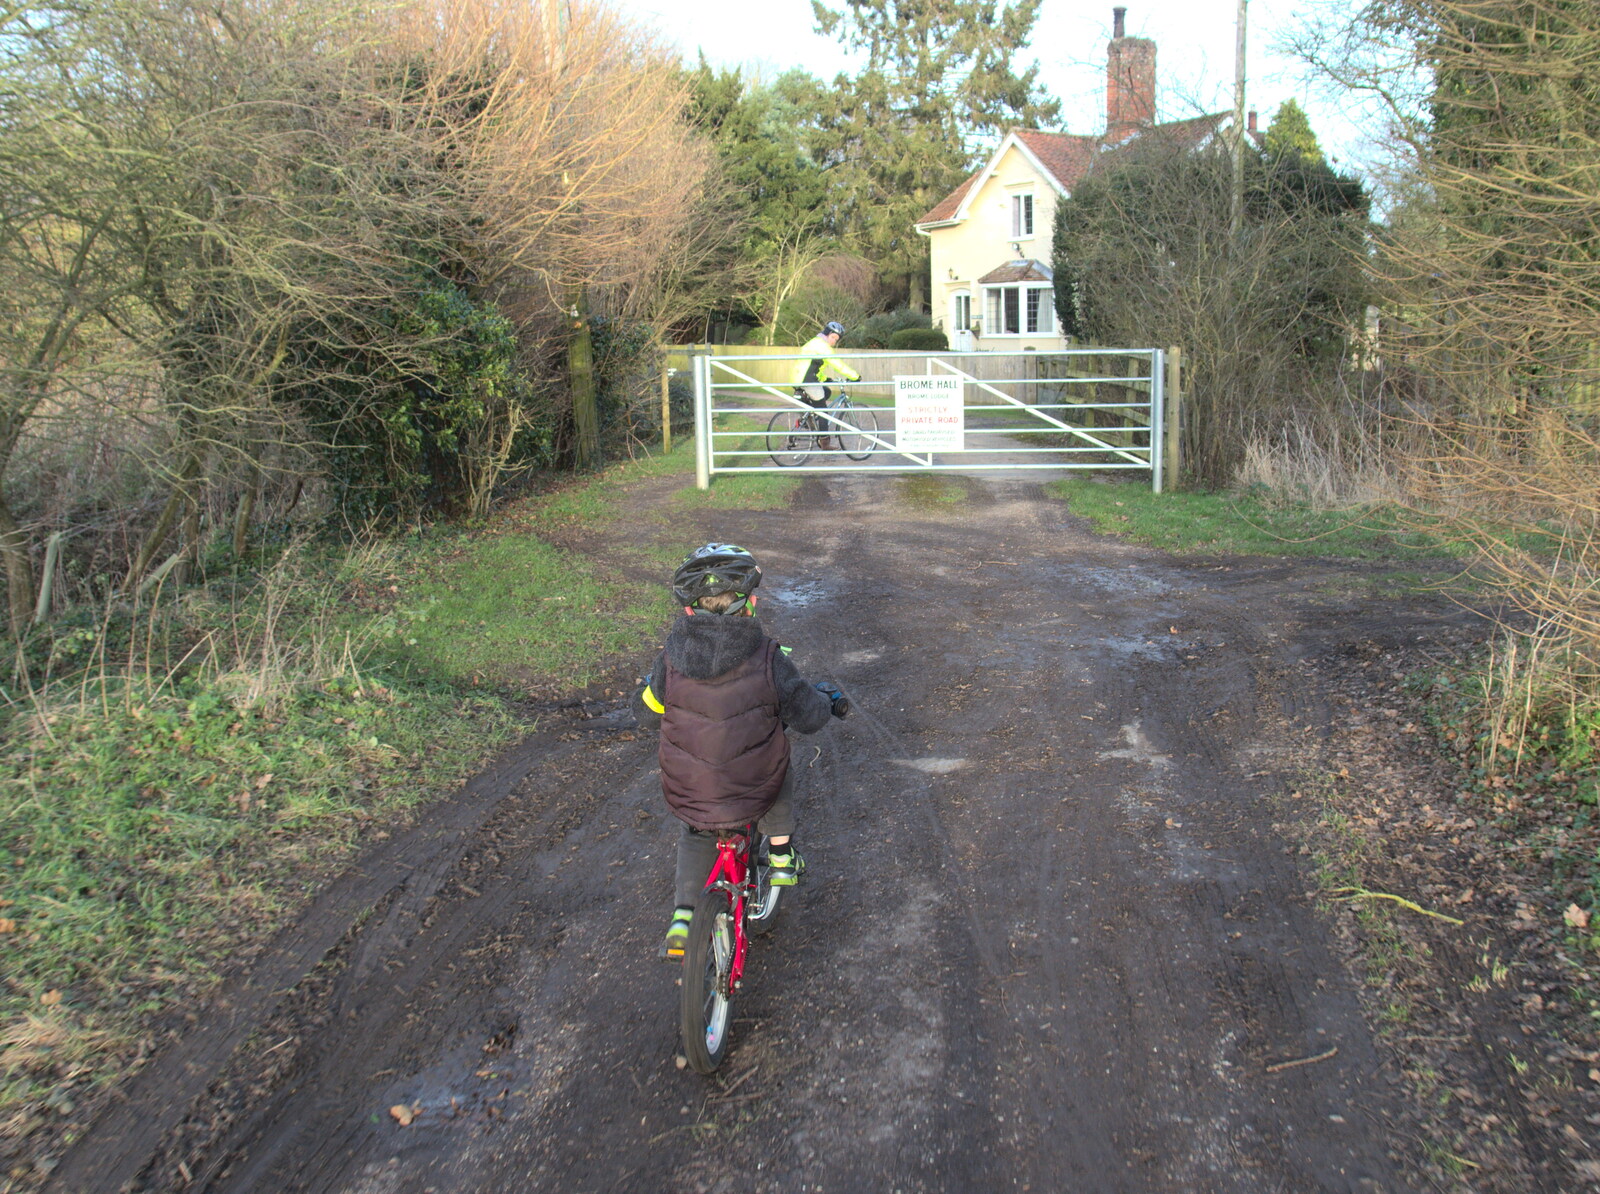 The gate half-way along The Avenue from The BBs do a Recording, Hethel, Norfolk - 18th January 2015